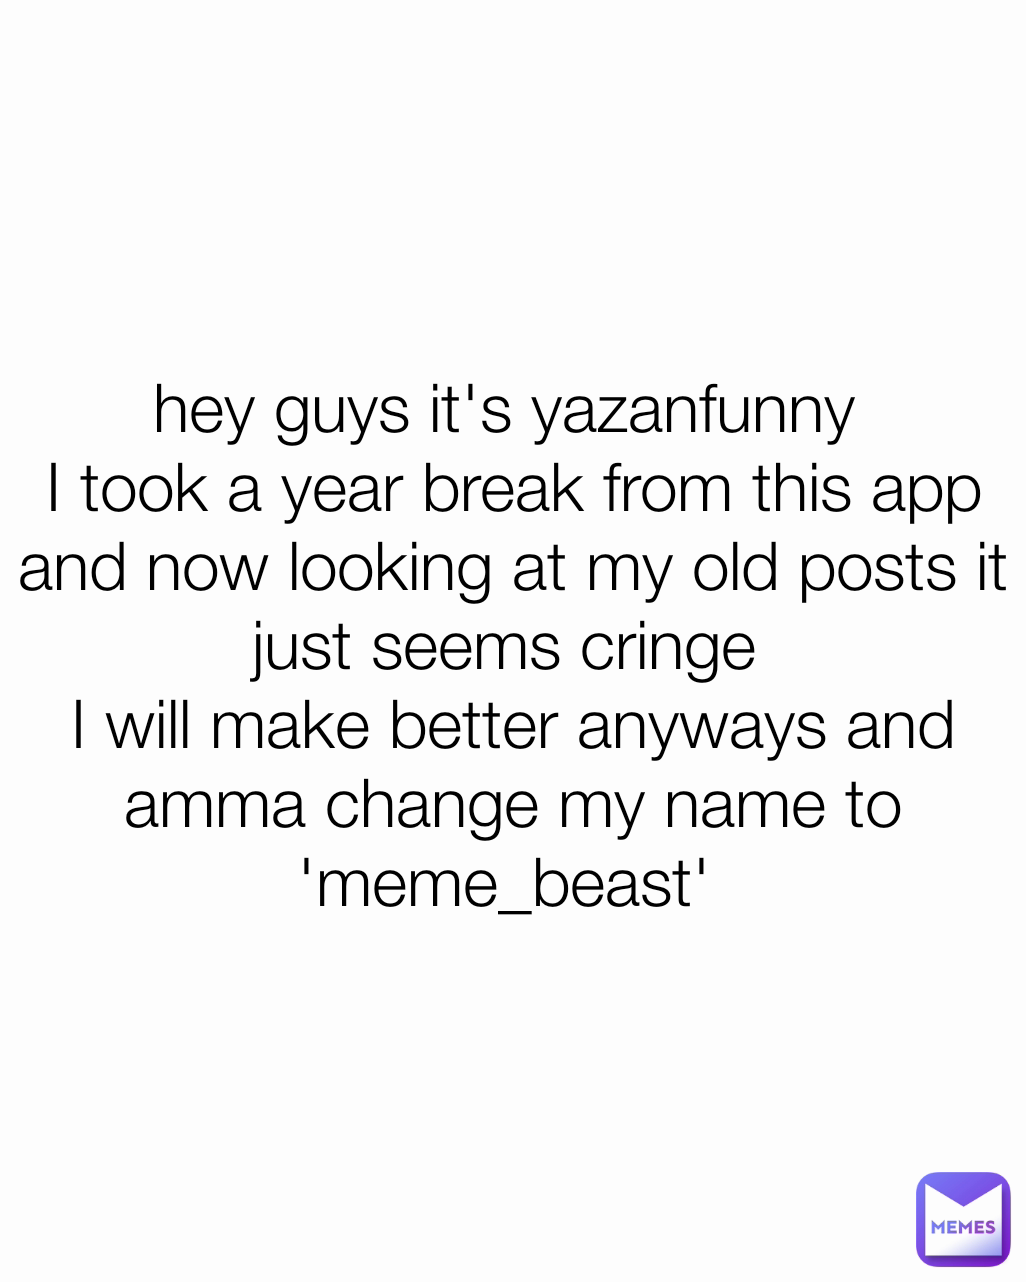 hey guys it's yazanfunny 
I took a year break from this app and now looking at my old posts it just seems cringe 
I will make better anyways and amma change my name to 'meme_beast' 